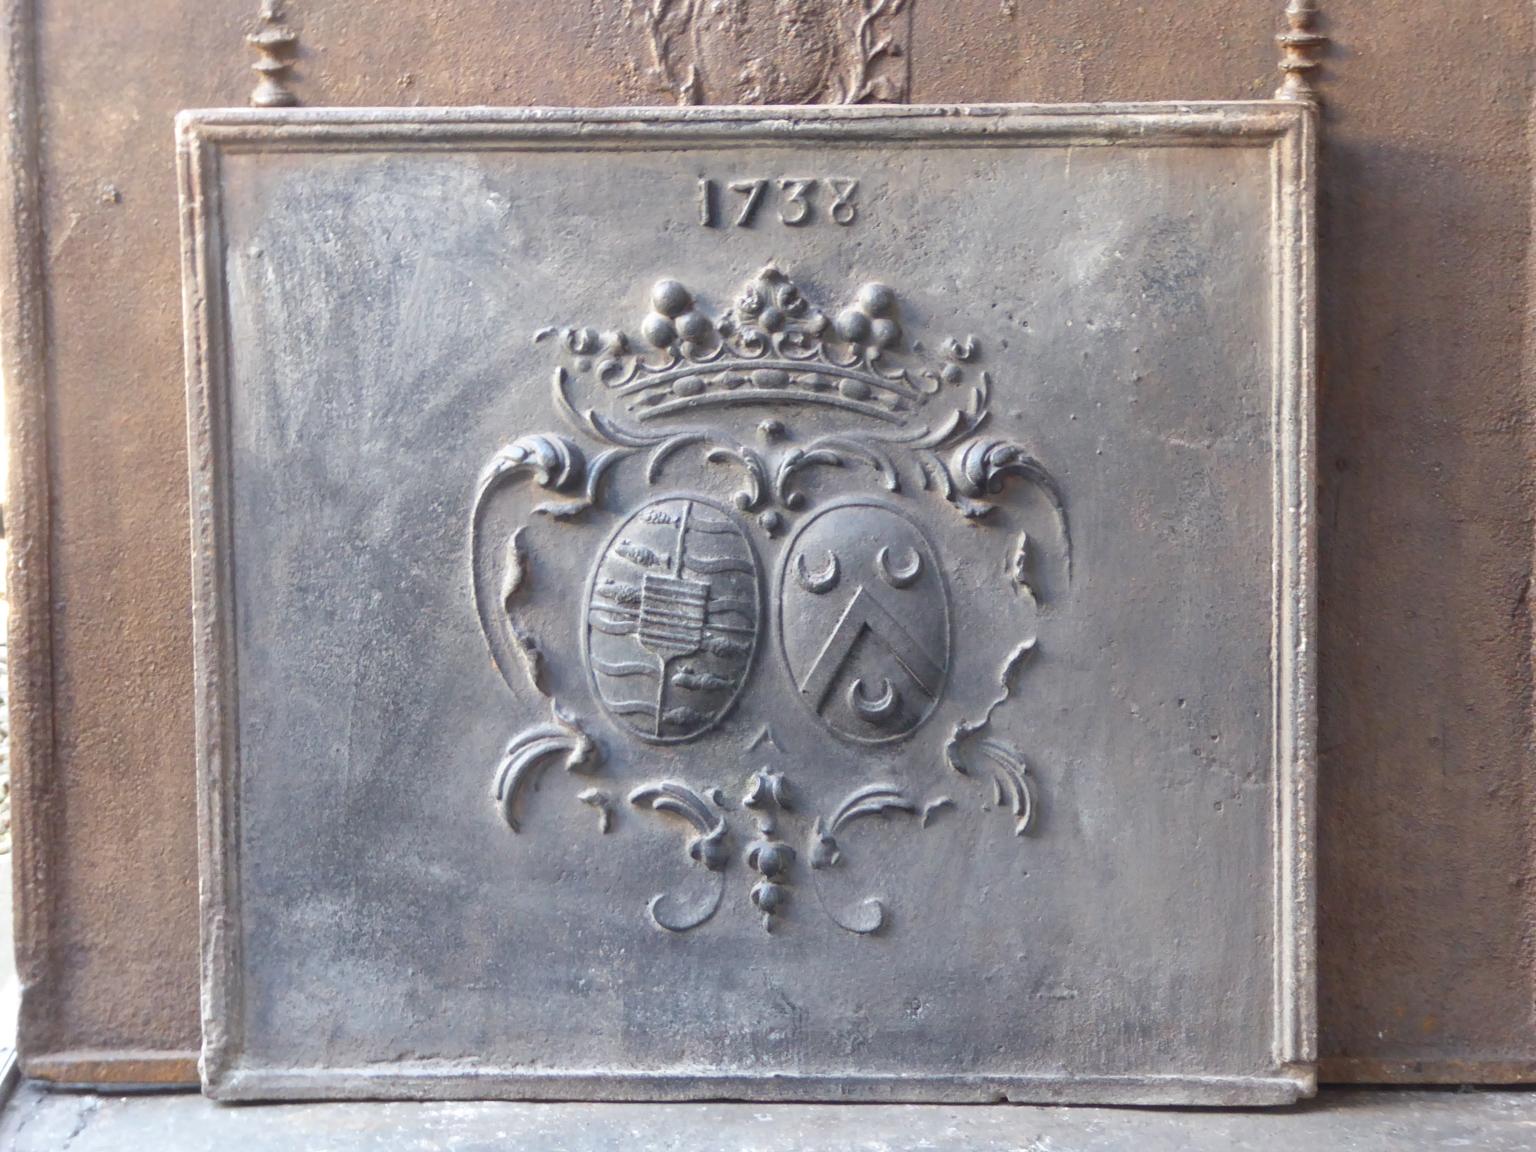 Beautiful 18th century French Louis XIV fireback with an unknown coat of arms. The crown suggests royalty. The date of production of the fireback, 1732, is also cast in the fireback.

The fireback has a natural brown patina. Upon request it can be